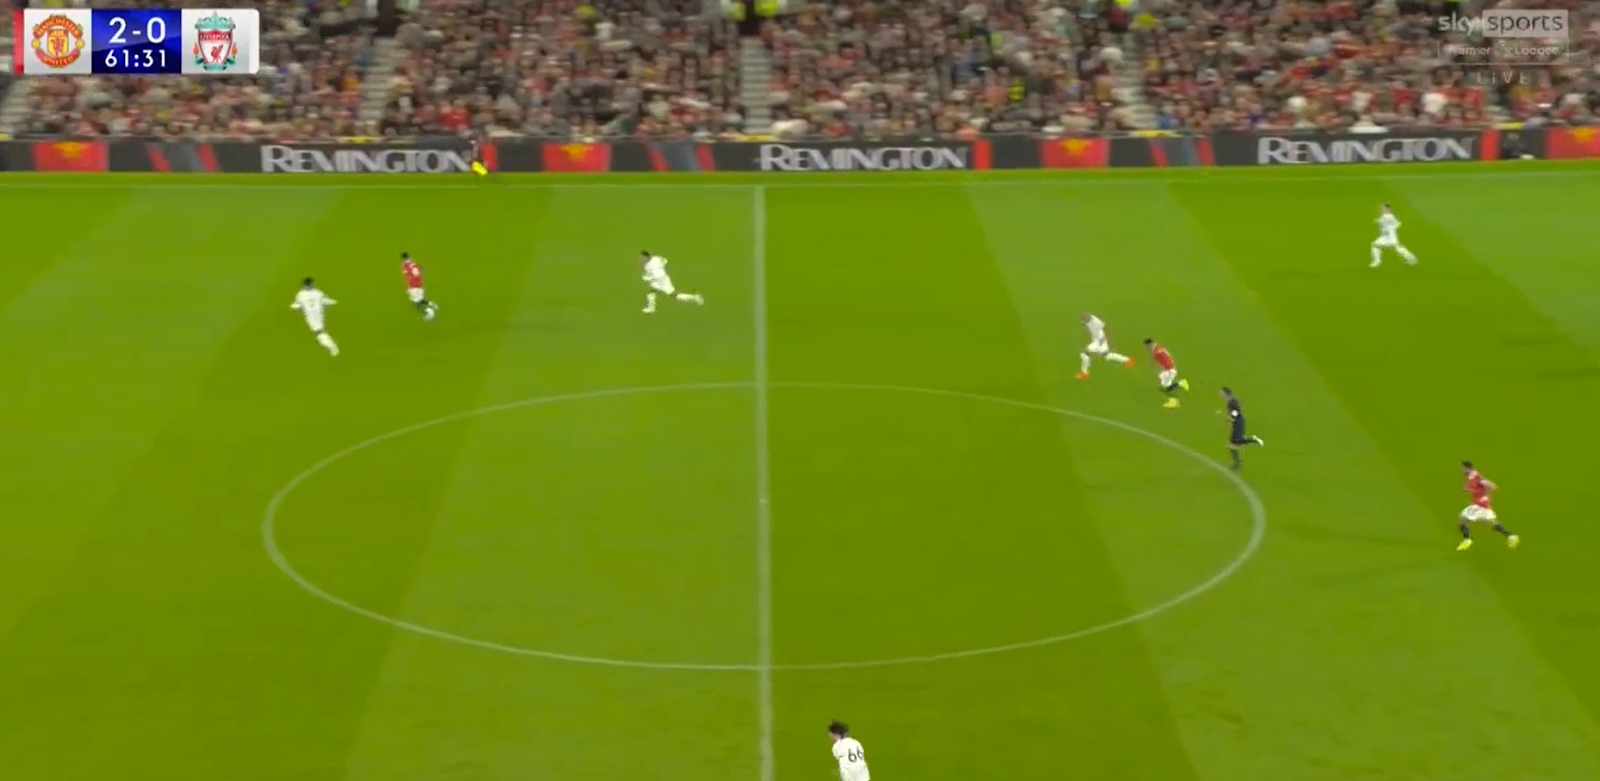 Sancho plays him in, with acres of space for United. Martial cleverly slows down the transition to allow his fellow attackers to catch up. (Sky Sports)